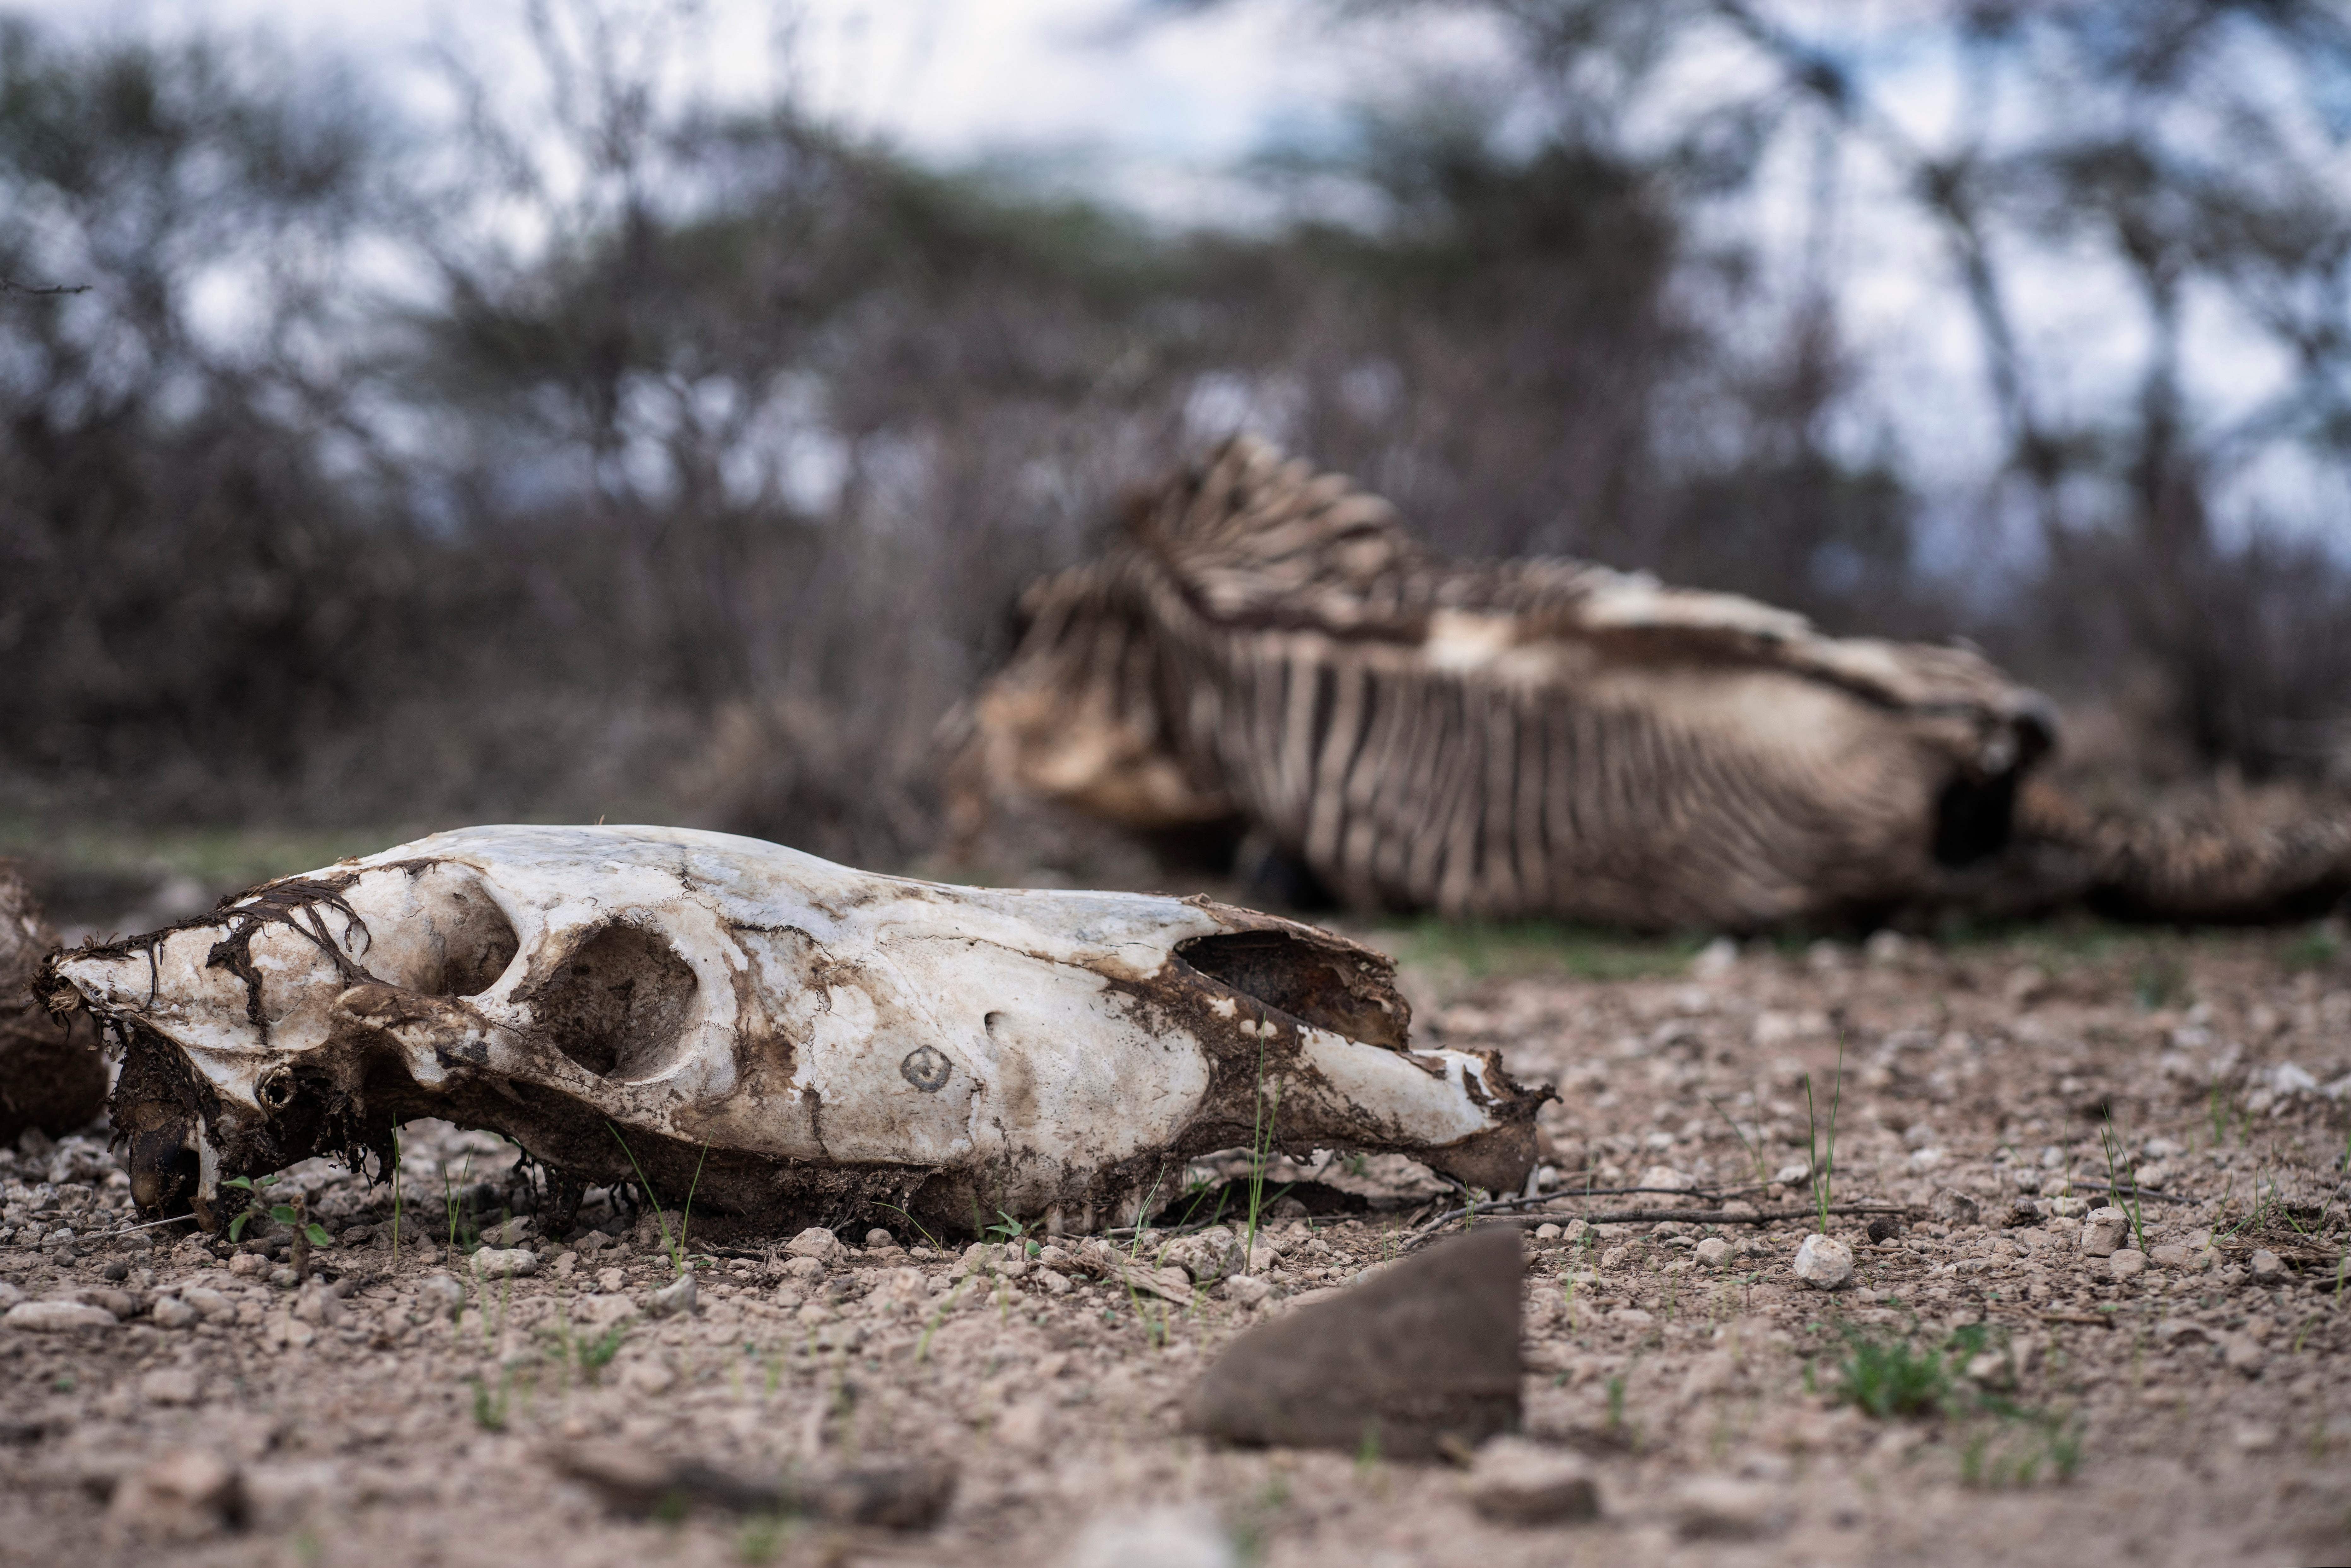 The carcass of a Grevy's Zebra. (Photo: Fredrik Lerneryd/AFP, Getty Images)